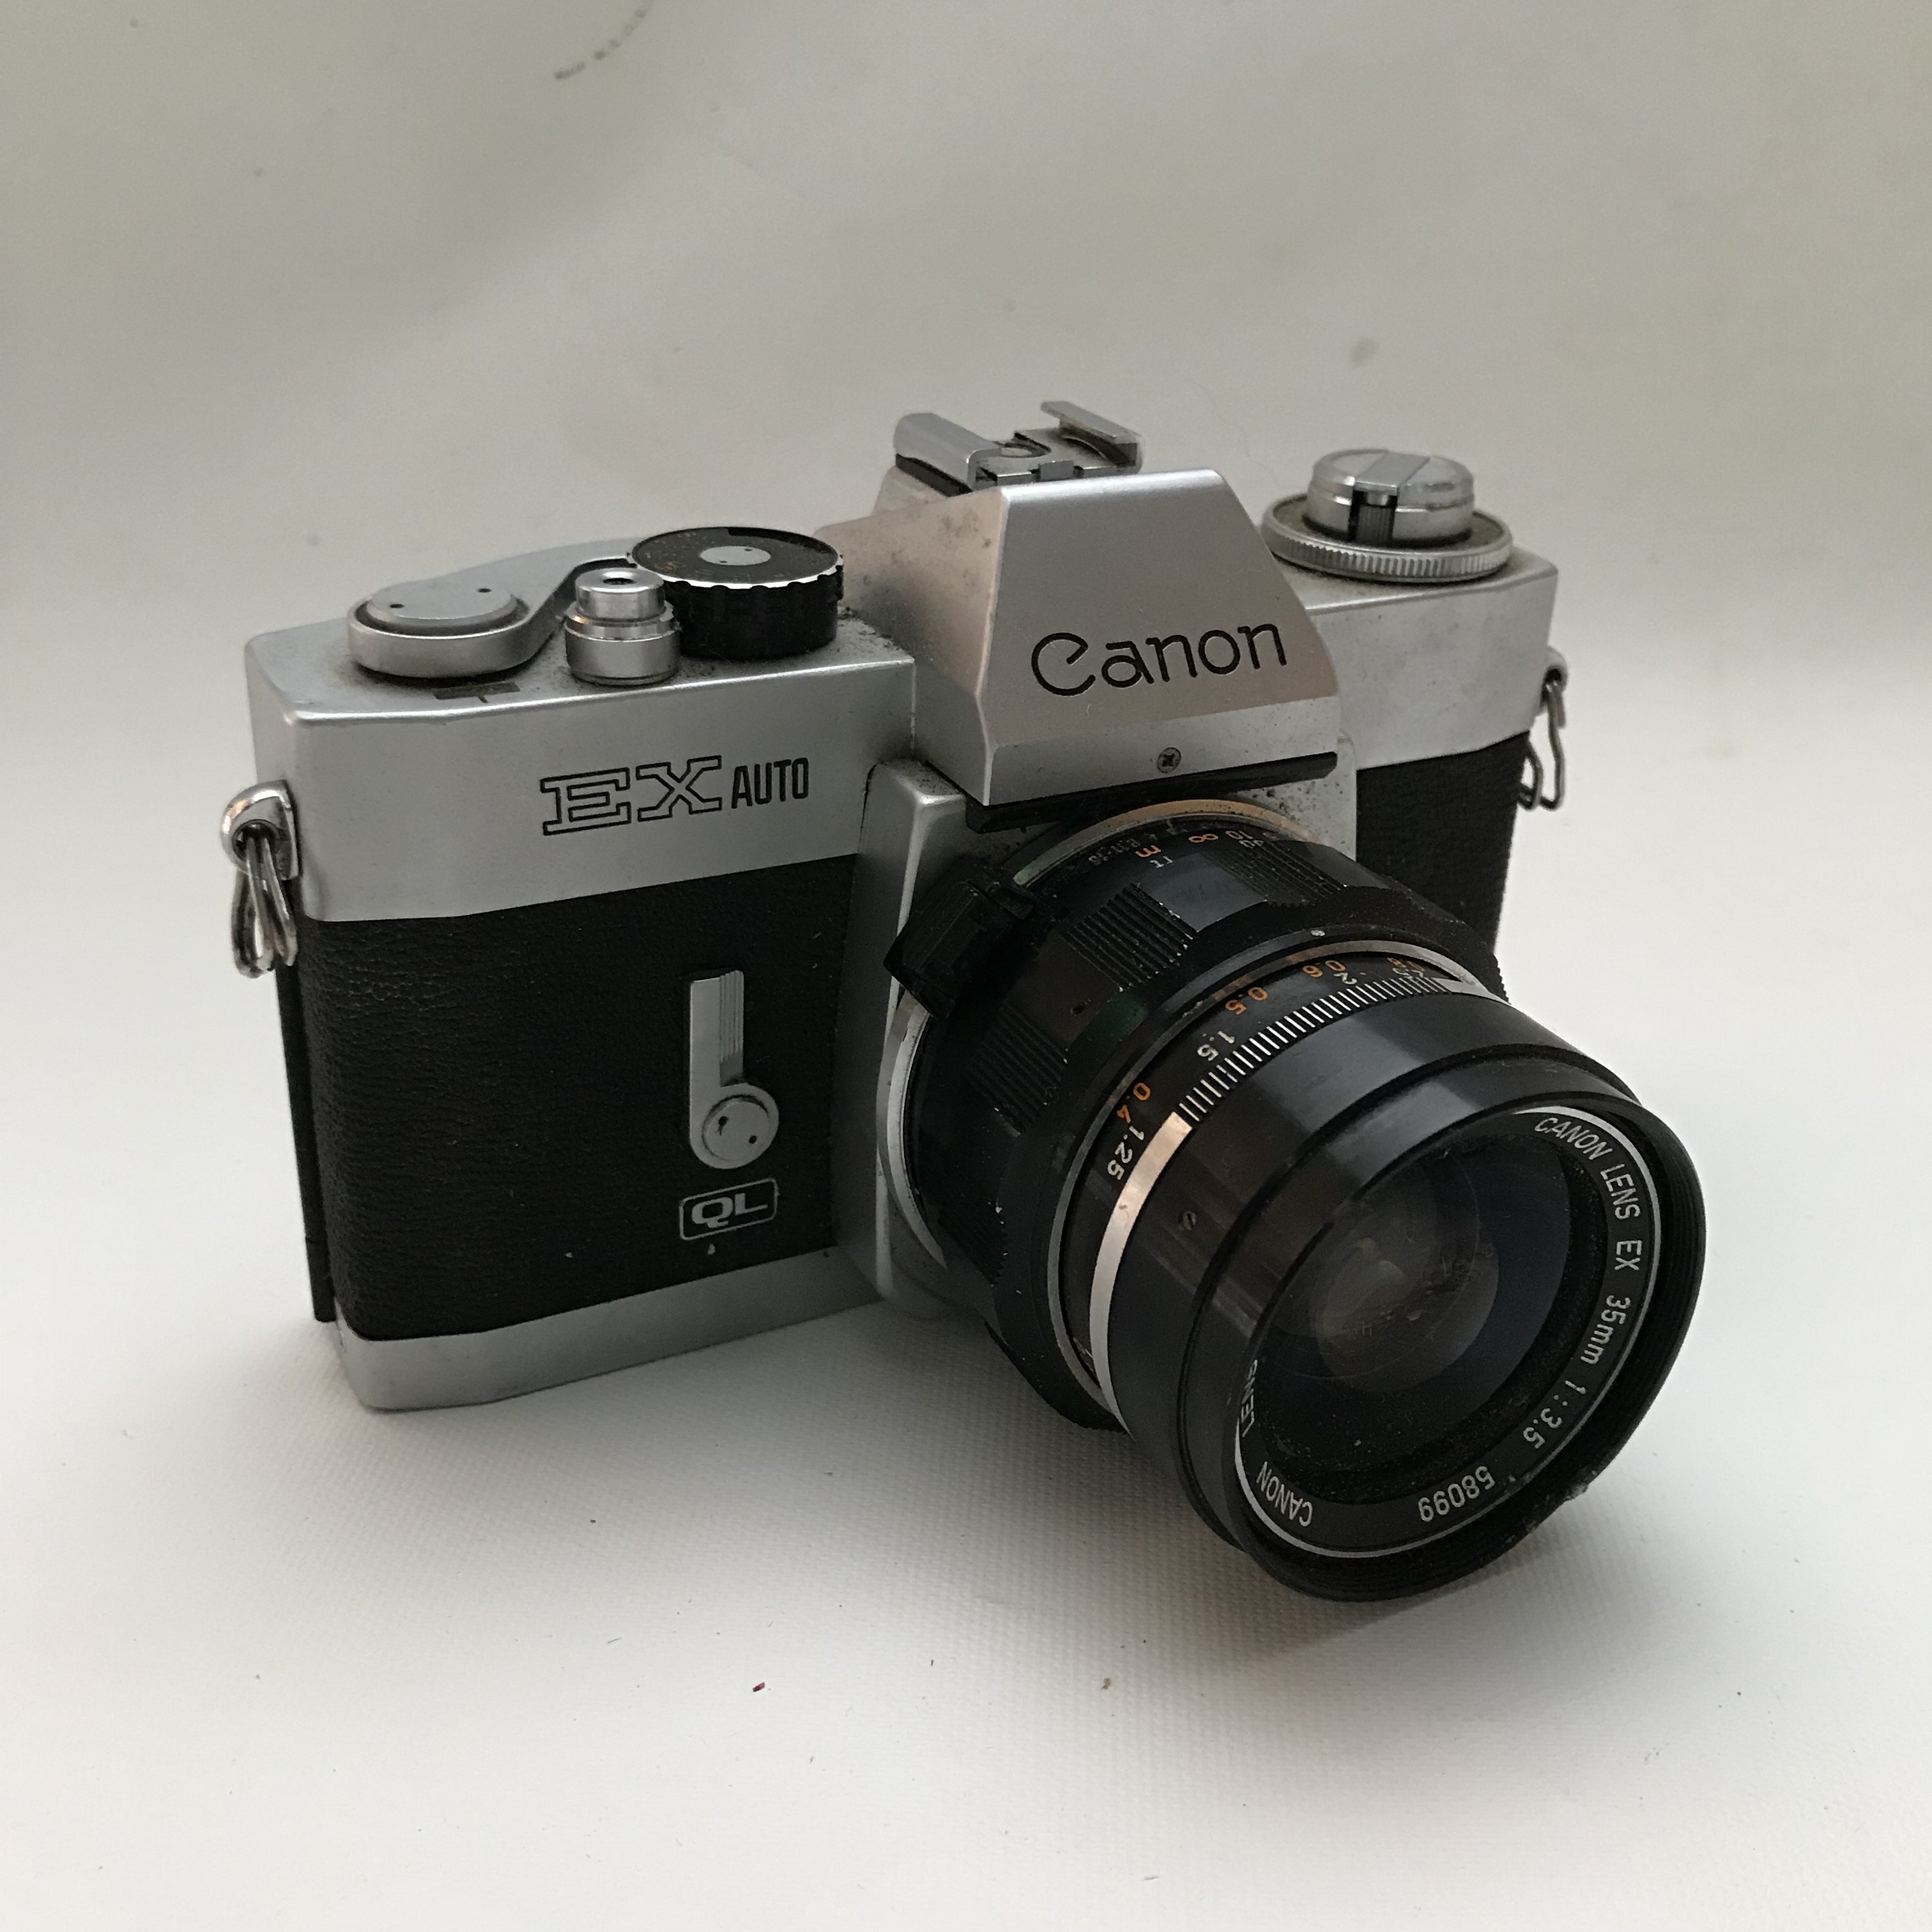 Canon Ex Auto Vintage 35mm Film Camera With Canon Ex 35mm F 3 5 Lens Item 028 Look What I Found